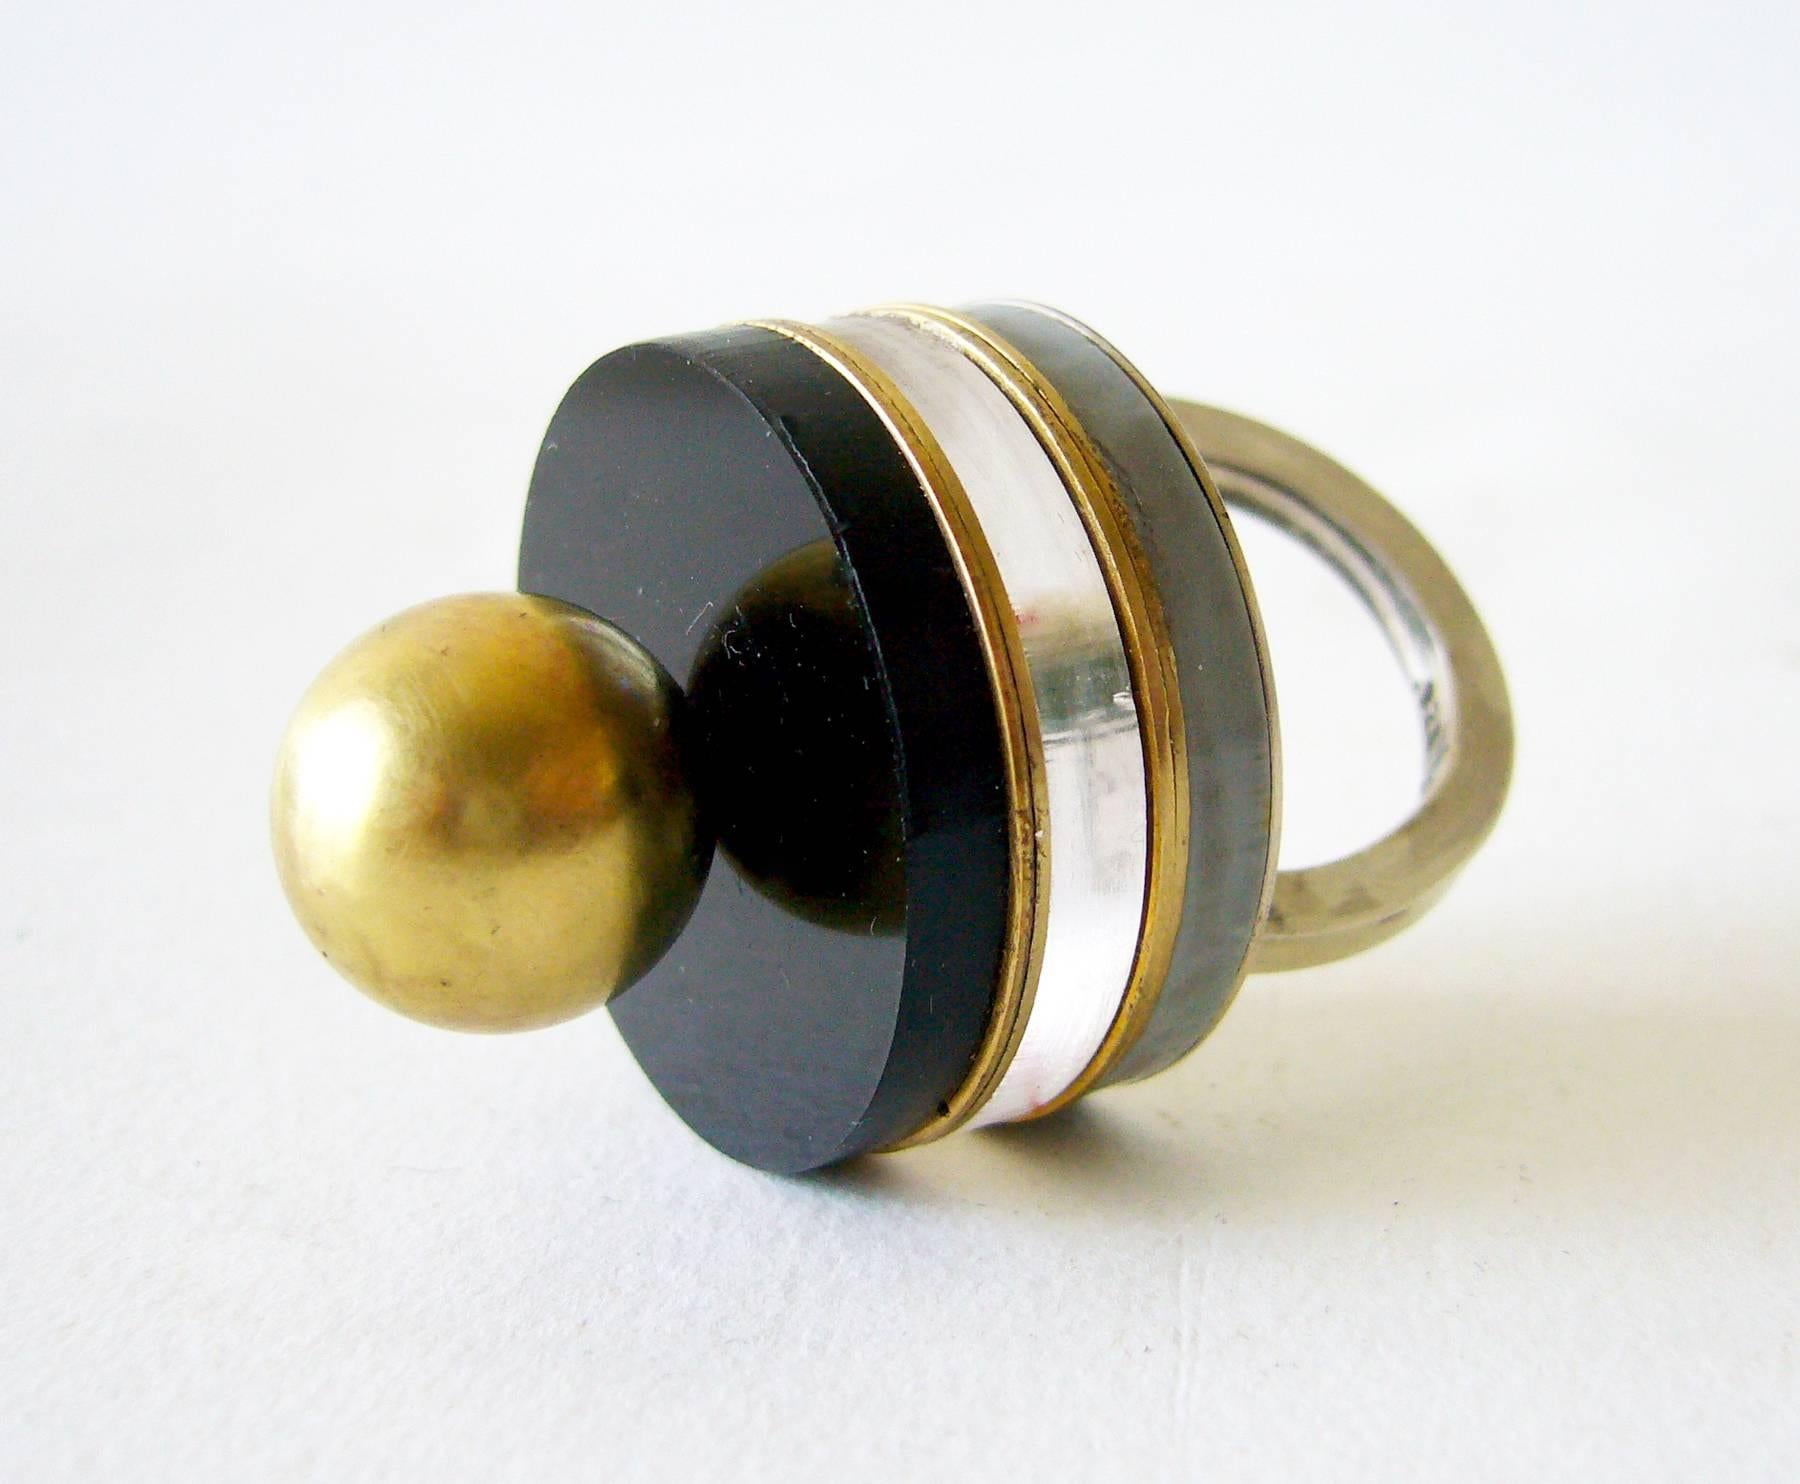 Sterling silver, brass and acrylic post modernist ring created by Heidi Abrahamson of Phoenix, Arizona.  Ring is a finger size 6.5 - 6.75 and stands 1 1/8" off the finger.  Signed Heidi, .925.  In excellent condition.  